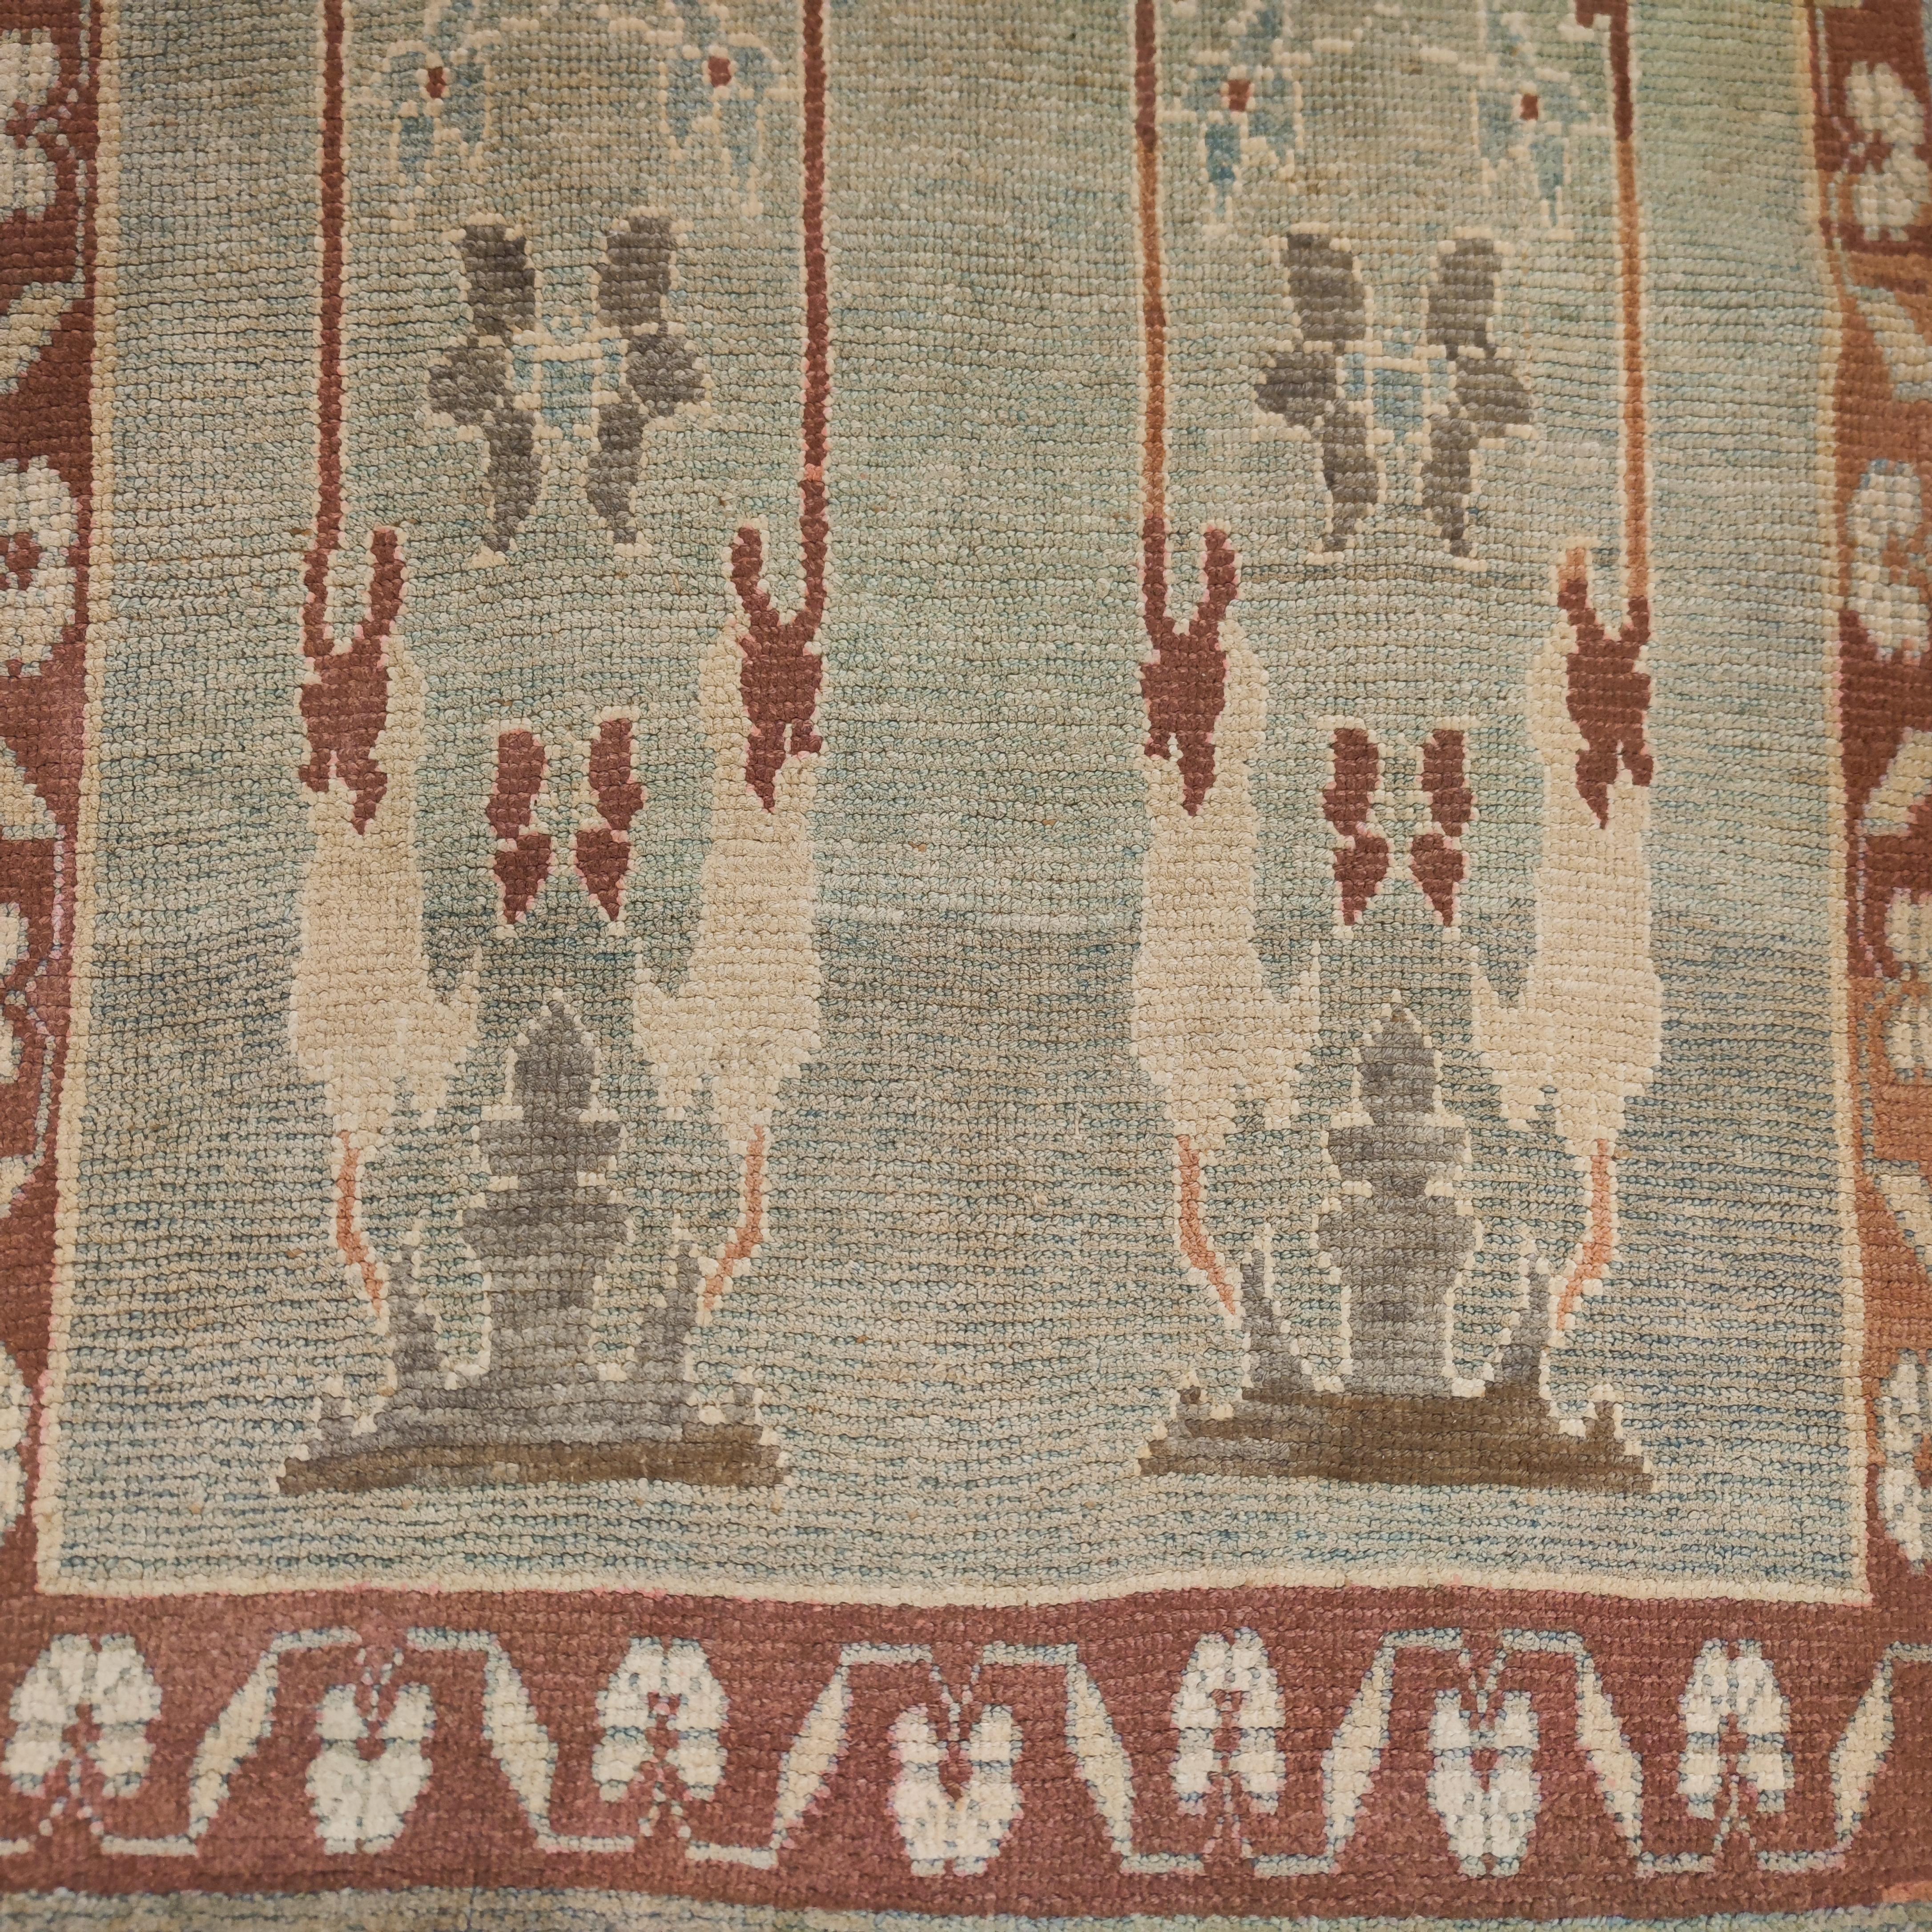 A highly refined Oushak rug distinguished by a stunning aqua blue background, embellished by an all-over pattern composed of large palmettes in light grey flanked by a network of elaborately drawn leafs in ivory and light brown. Designs of this type